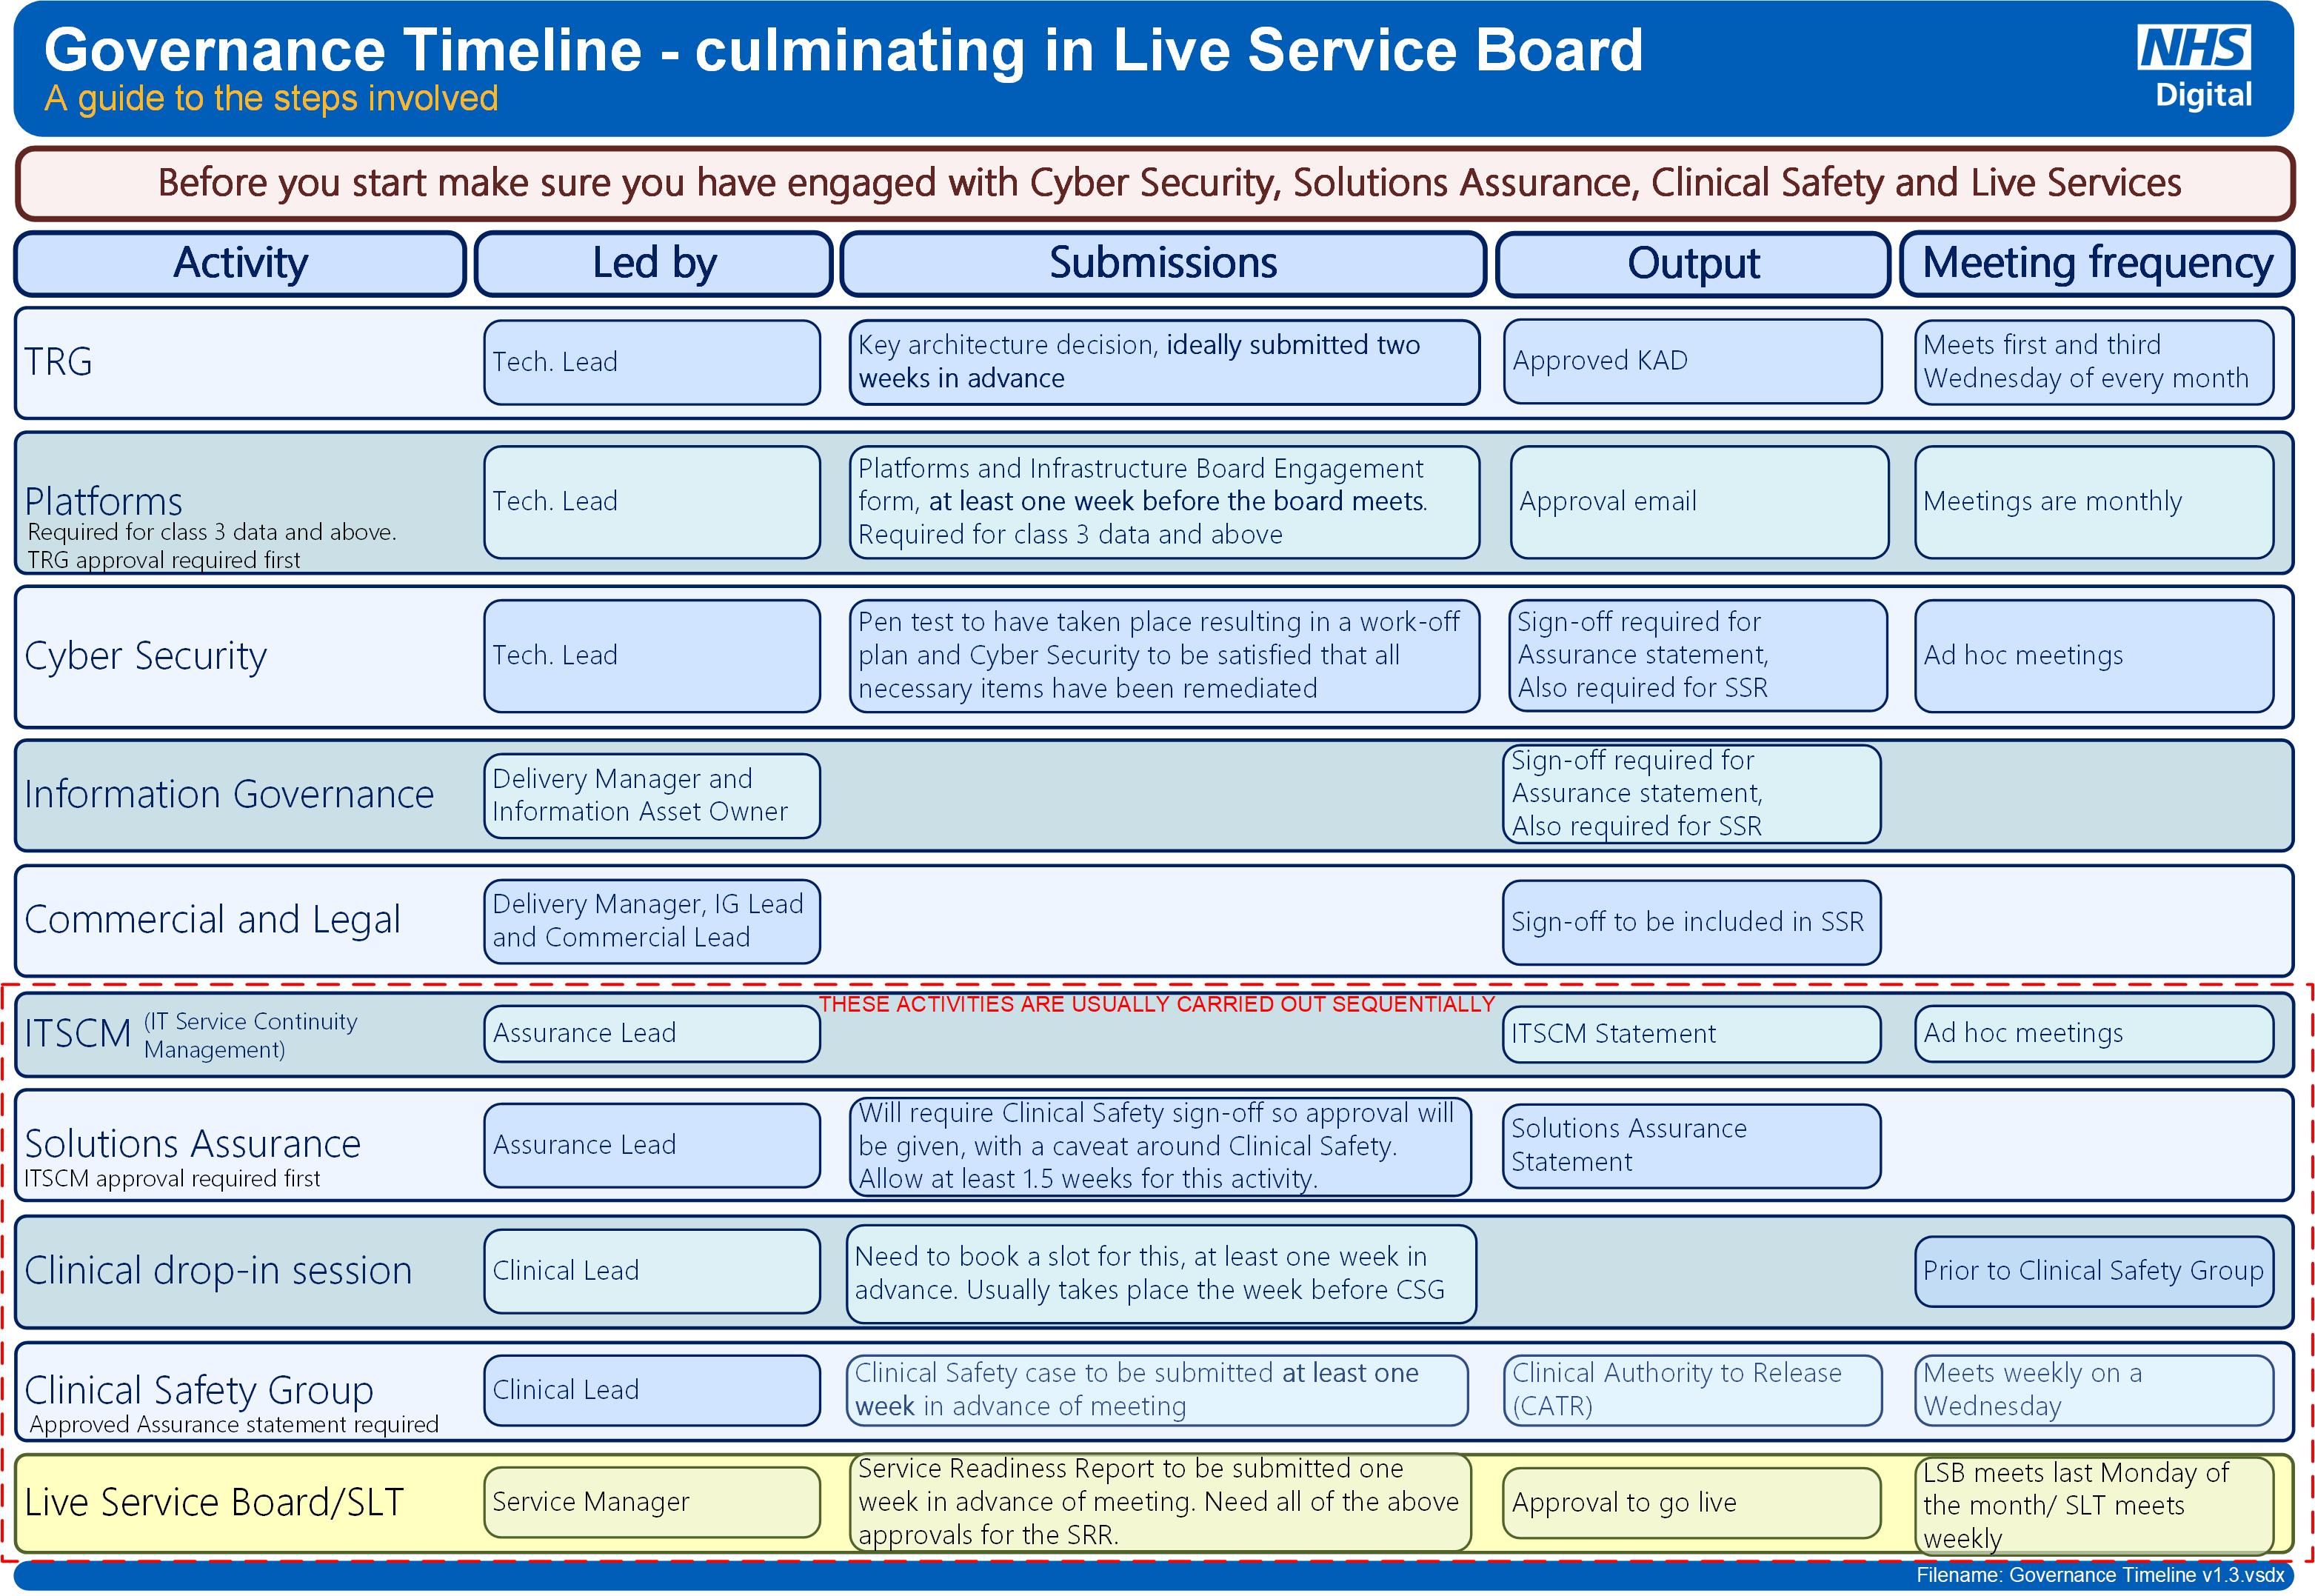 Picture of the governance timeline